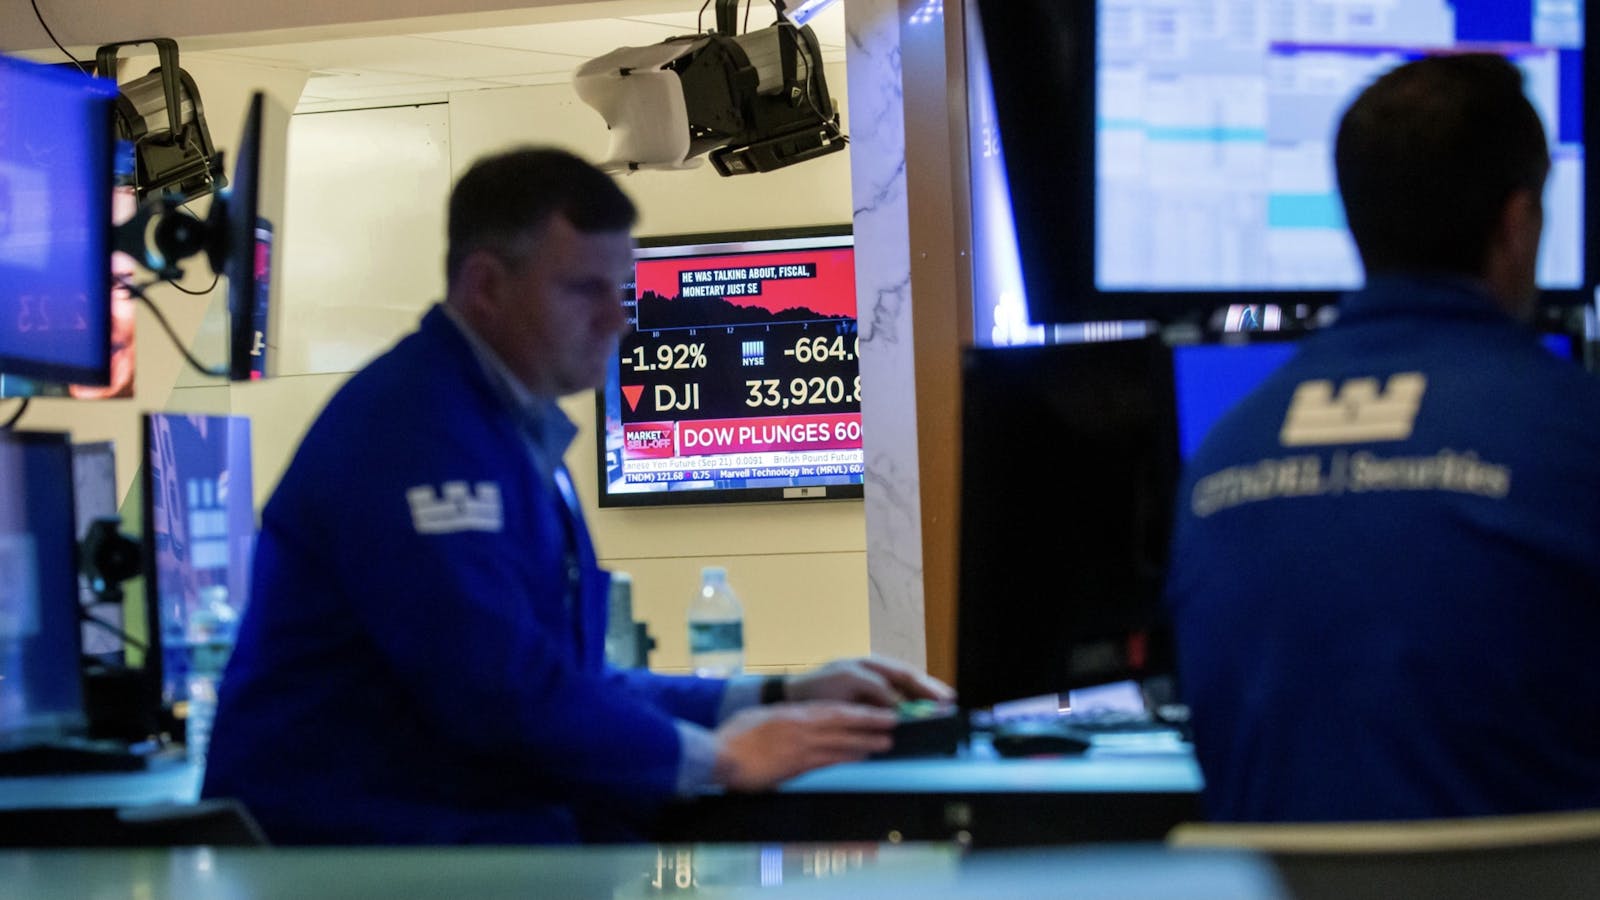 Traders on the floor of the NYSE in September. Photo by Bloomberg.